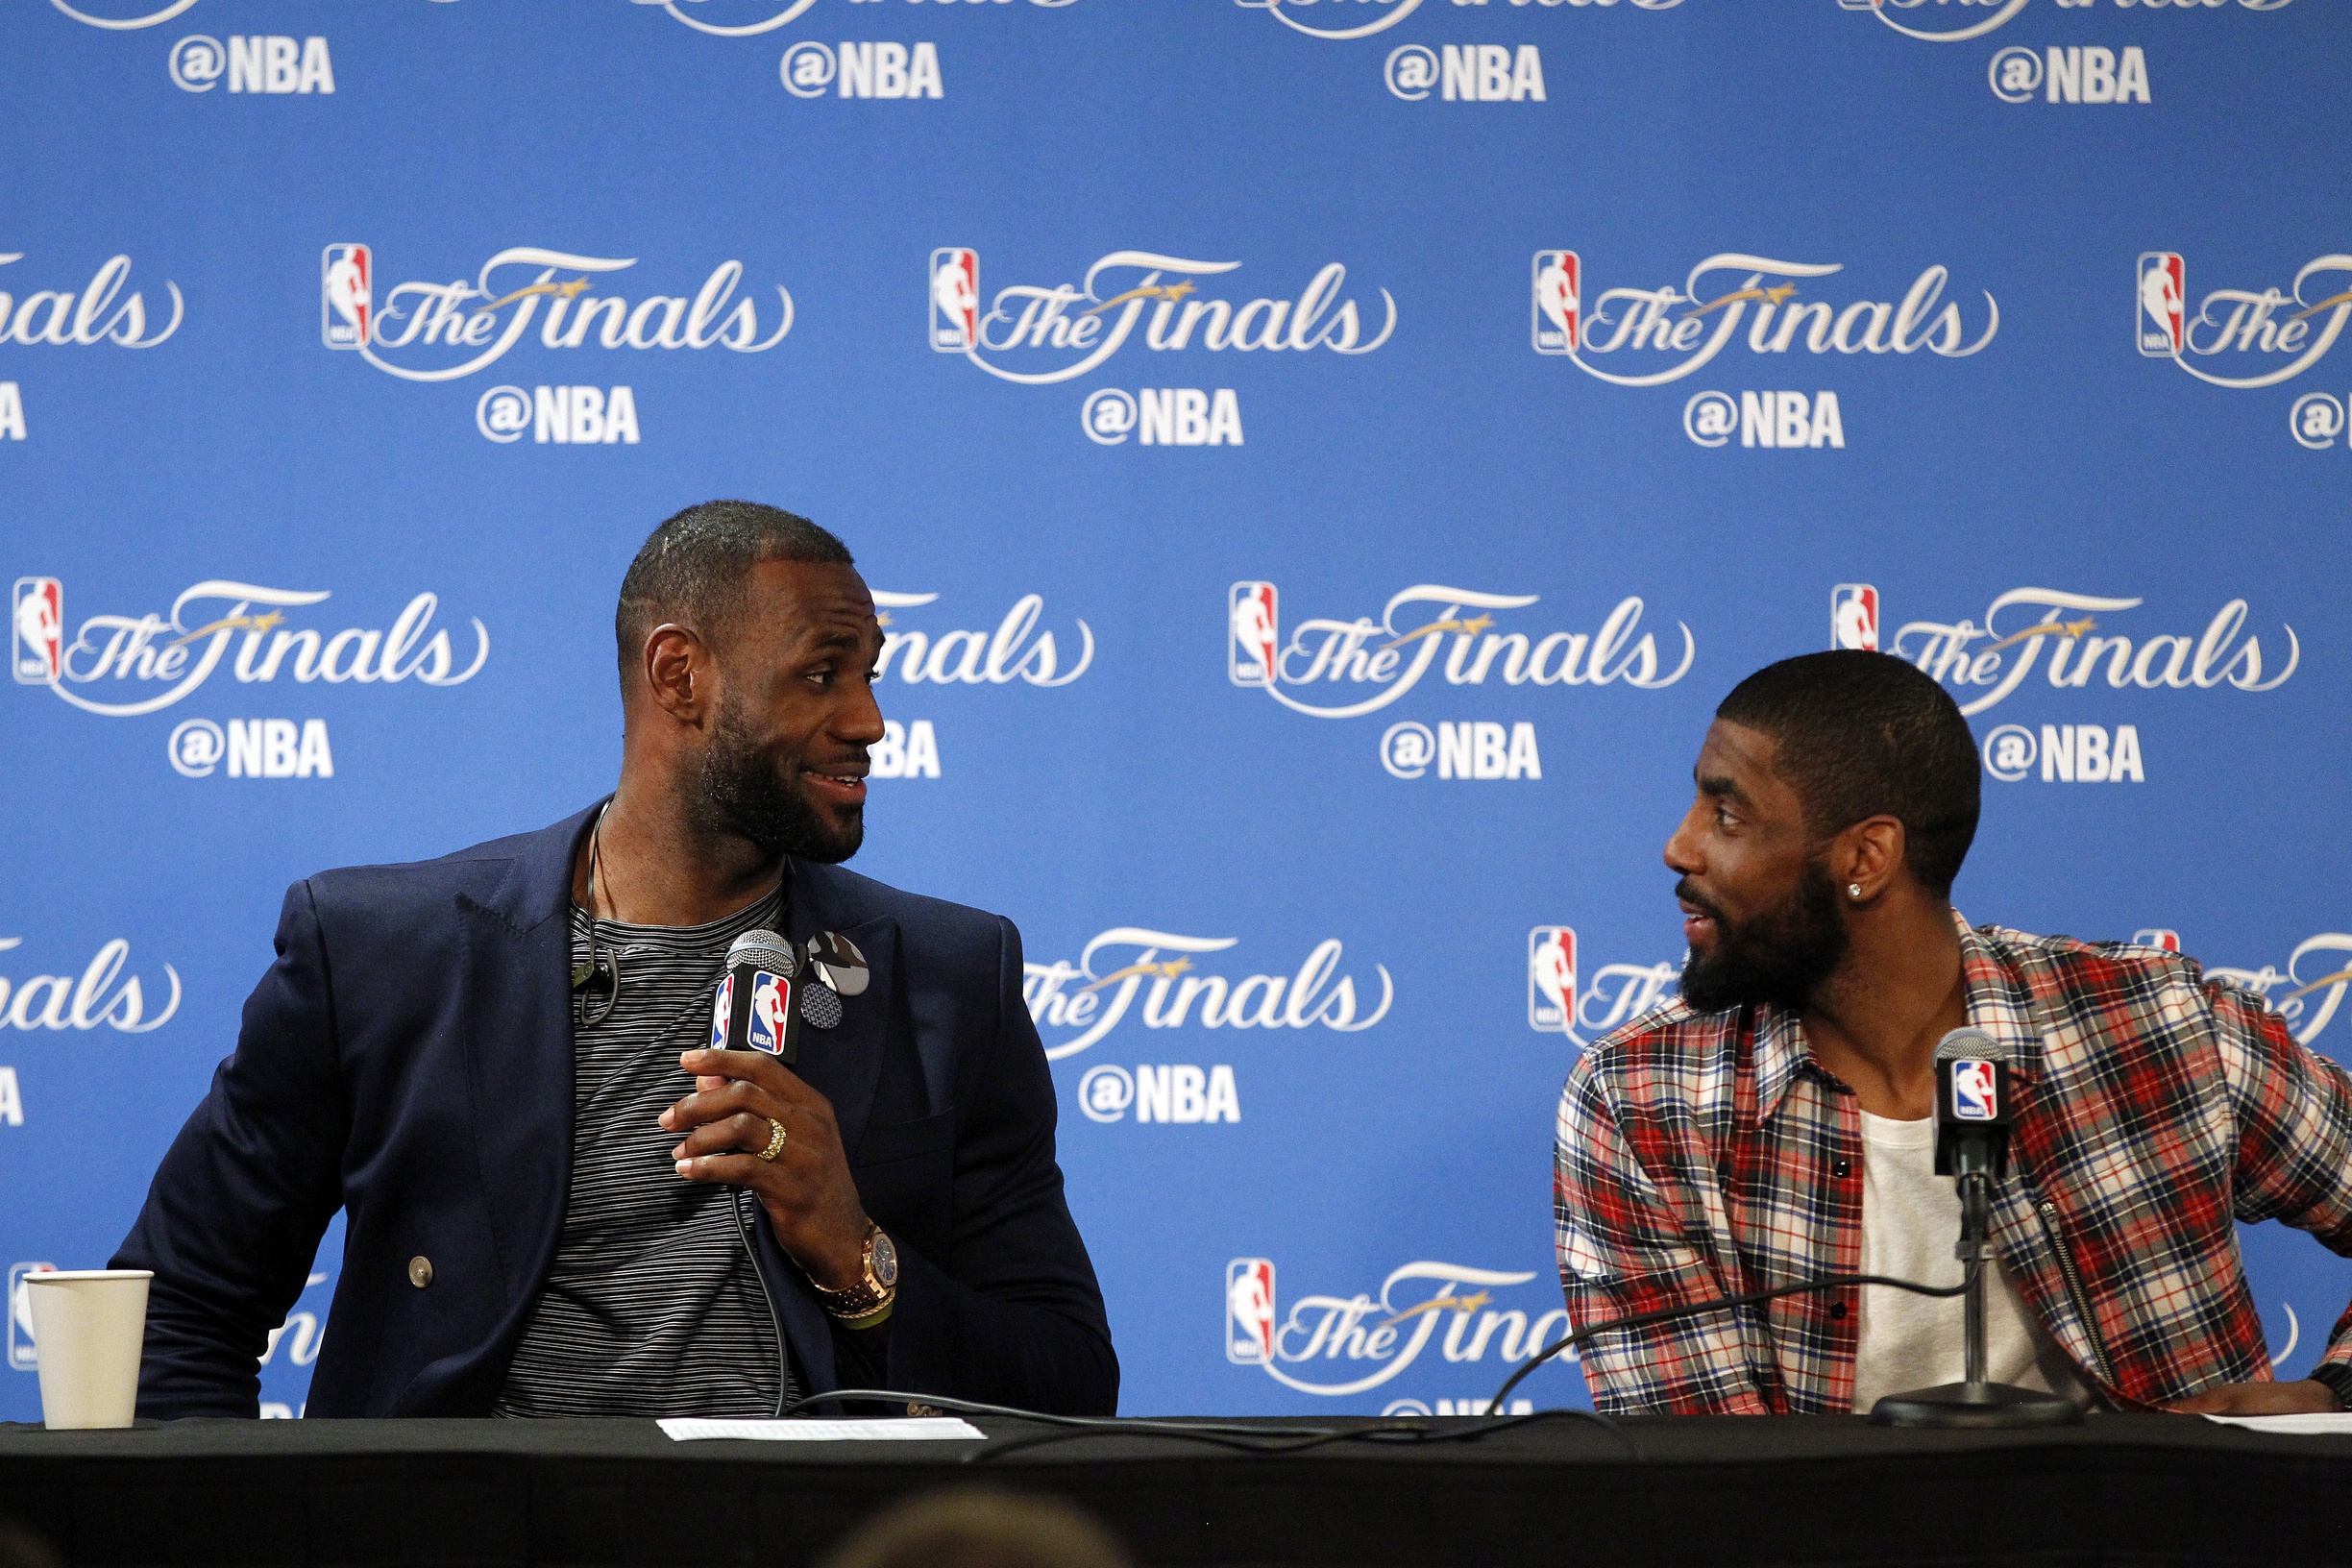 Former Cleveland Cavaliers stars LeBron James and Kyrie Irving